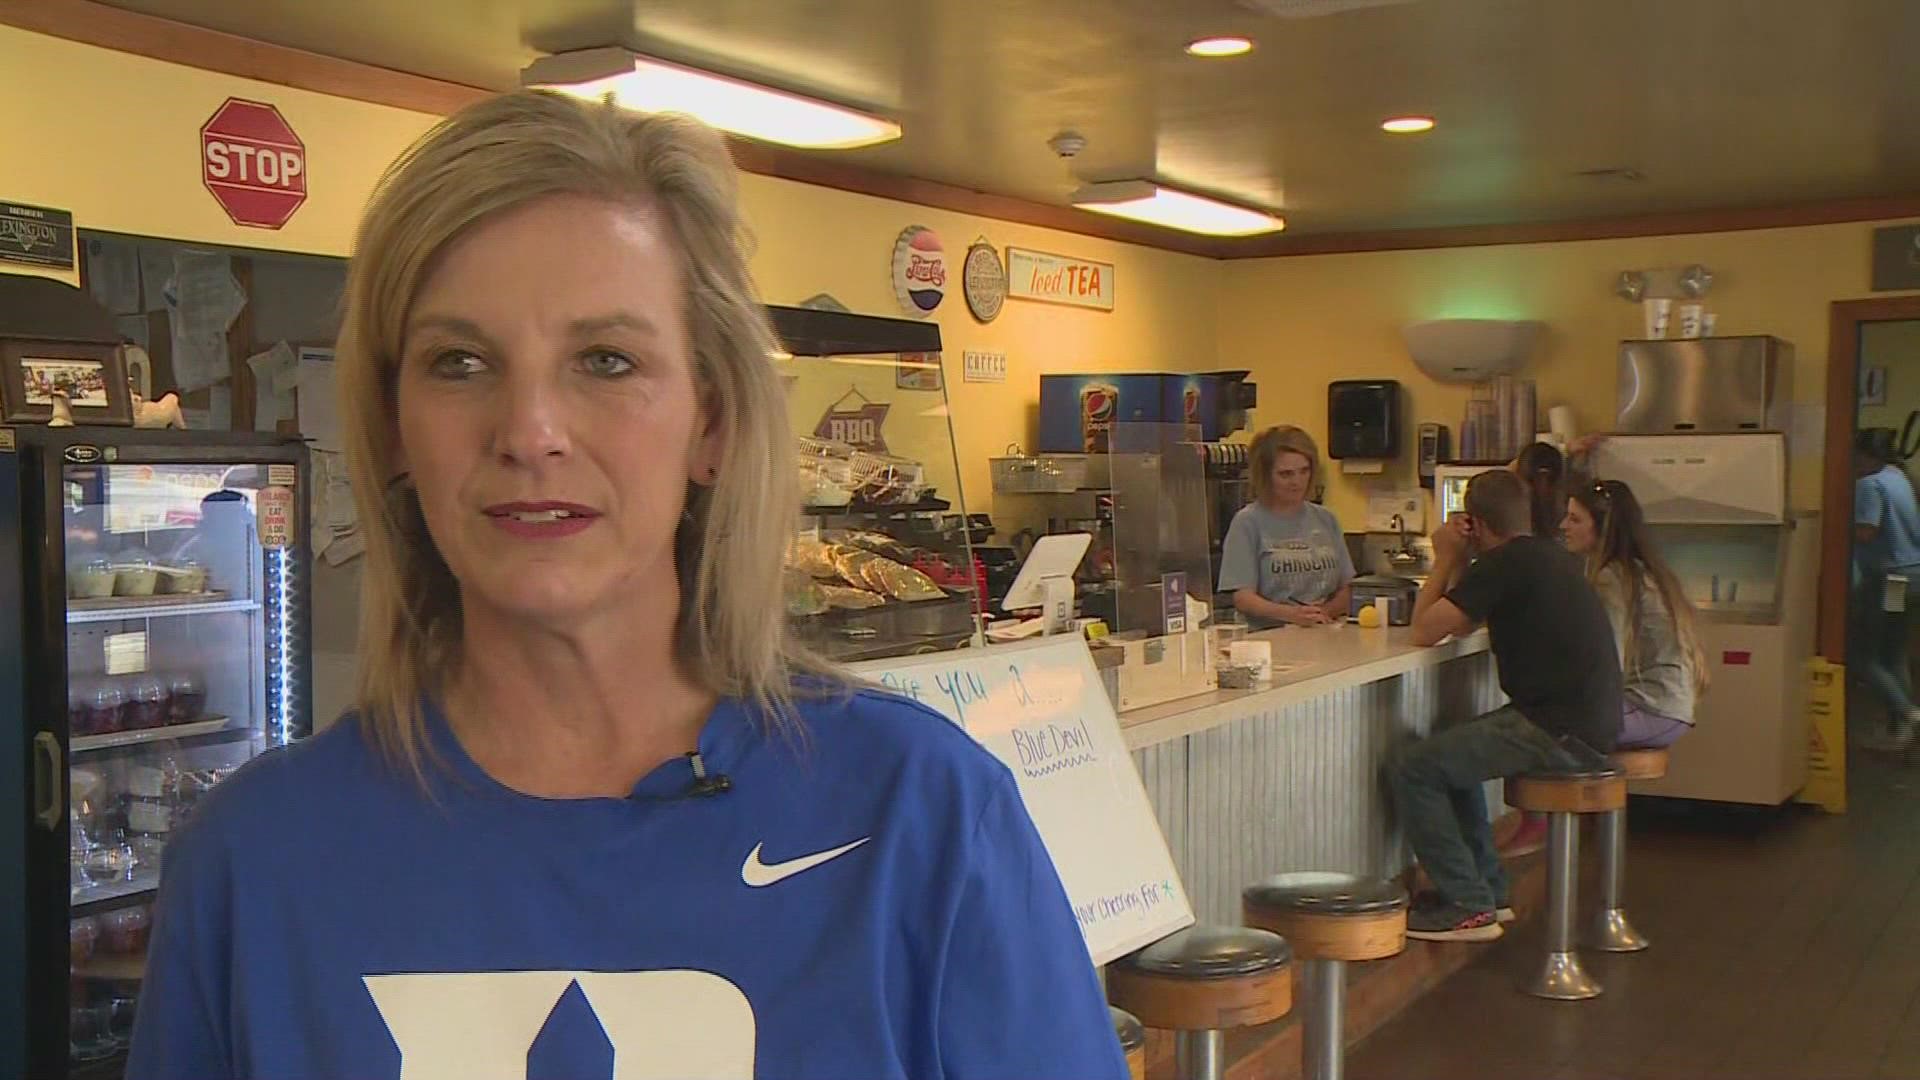 Becky Simmons from Tar Heel Q shares her views as she is in a house divided in during the Final Four game.